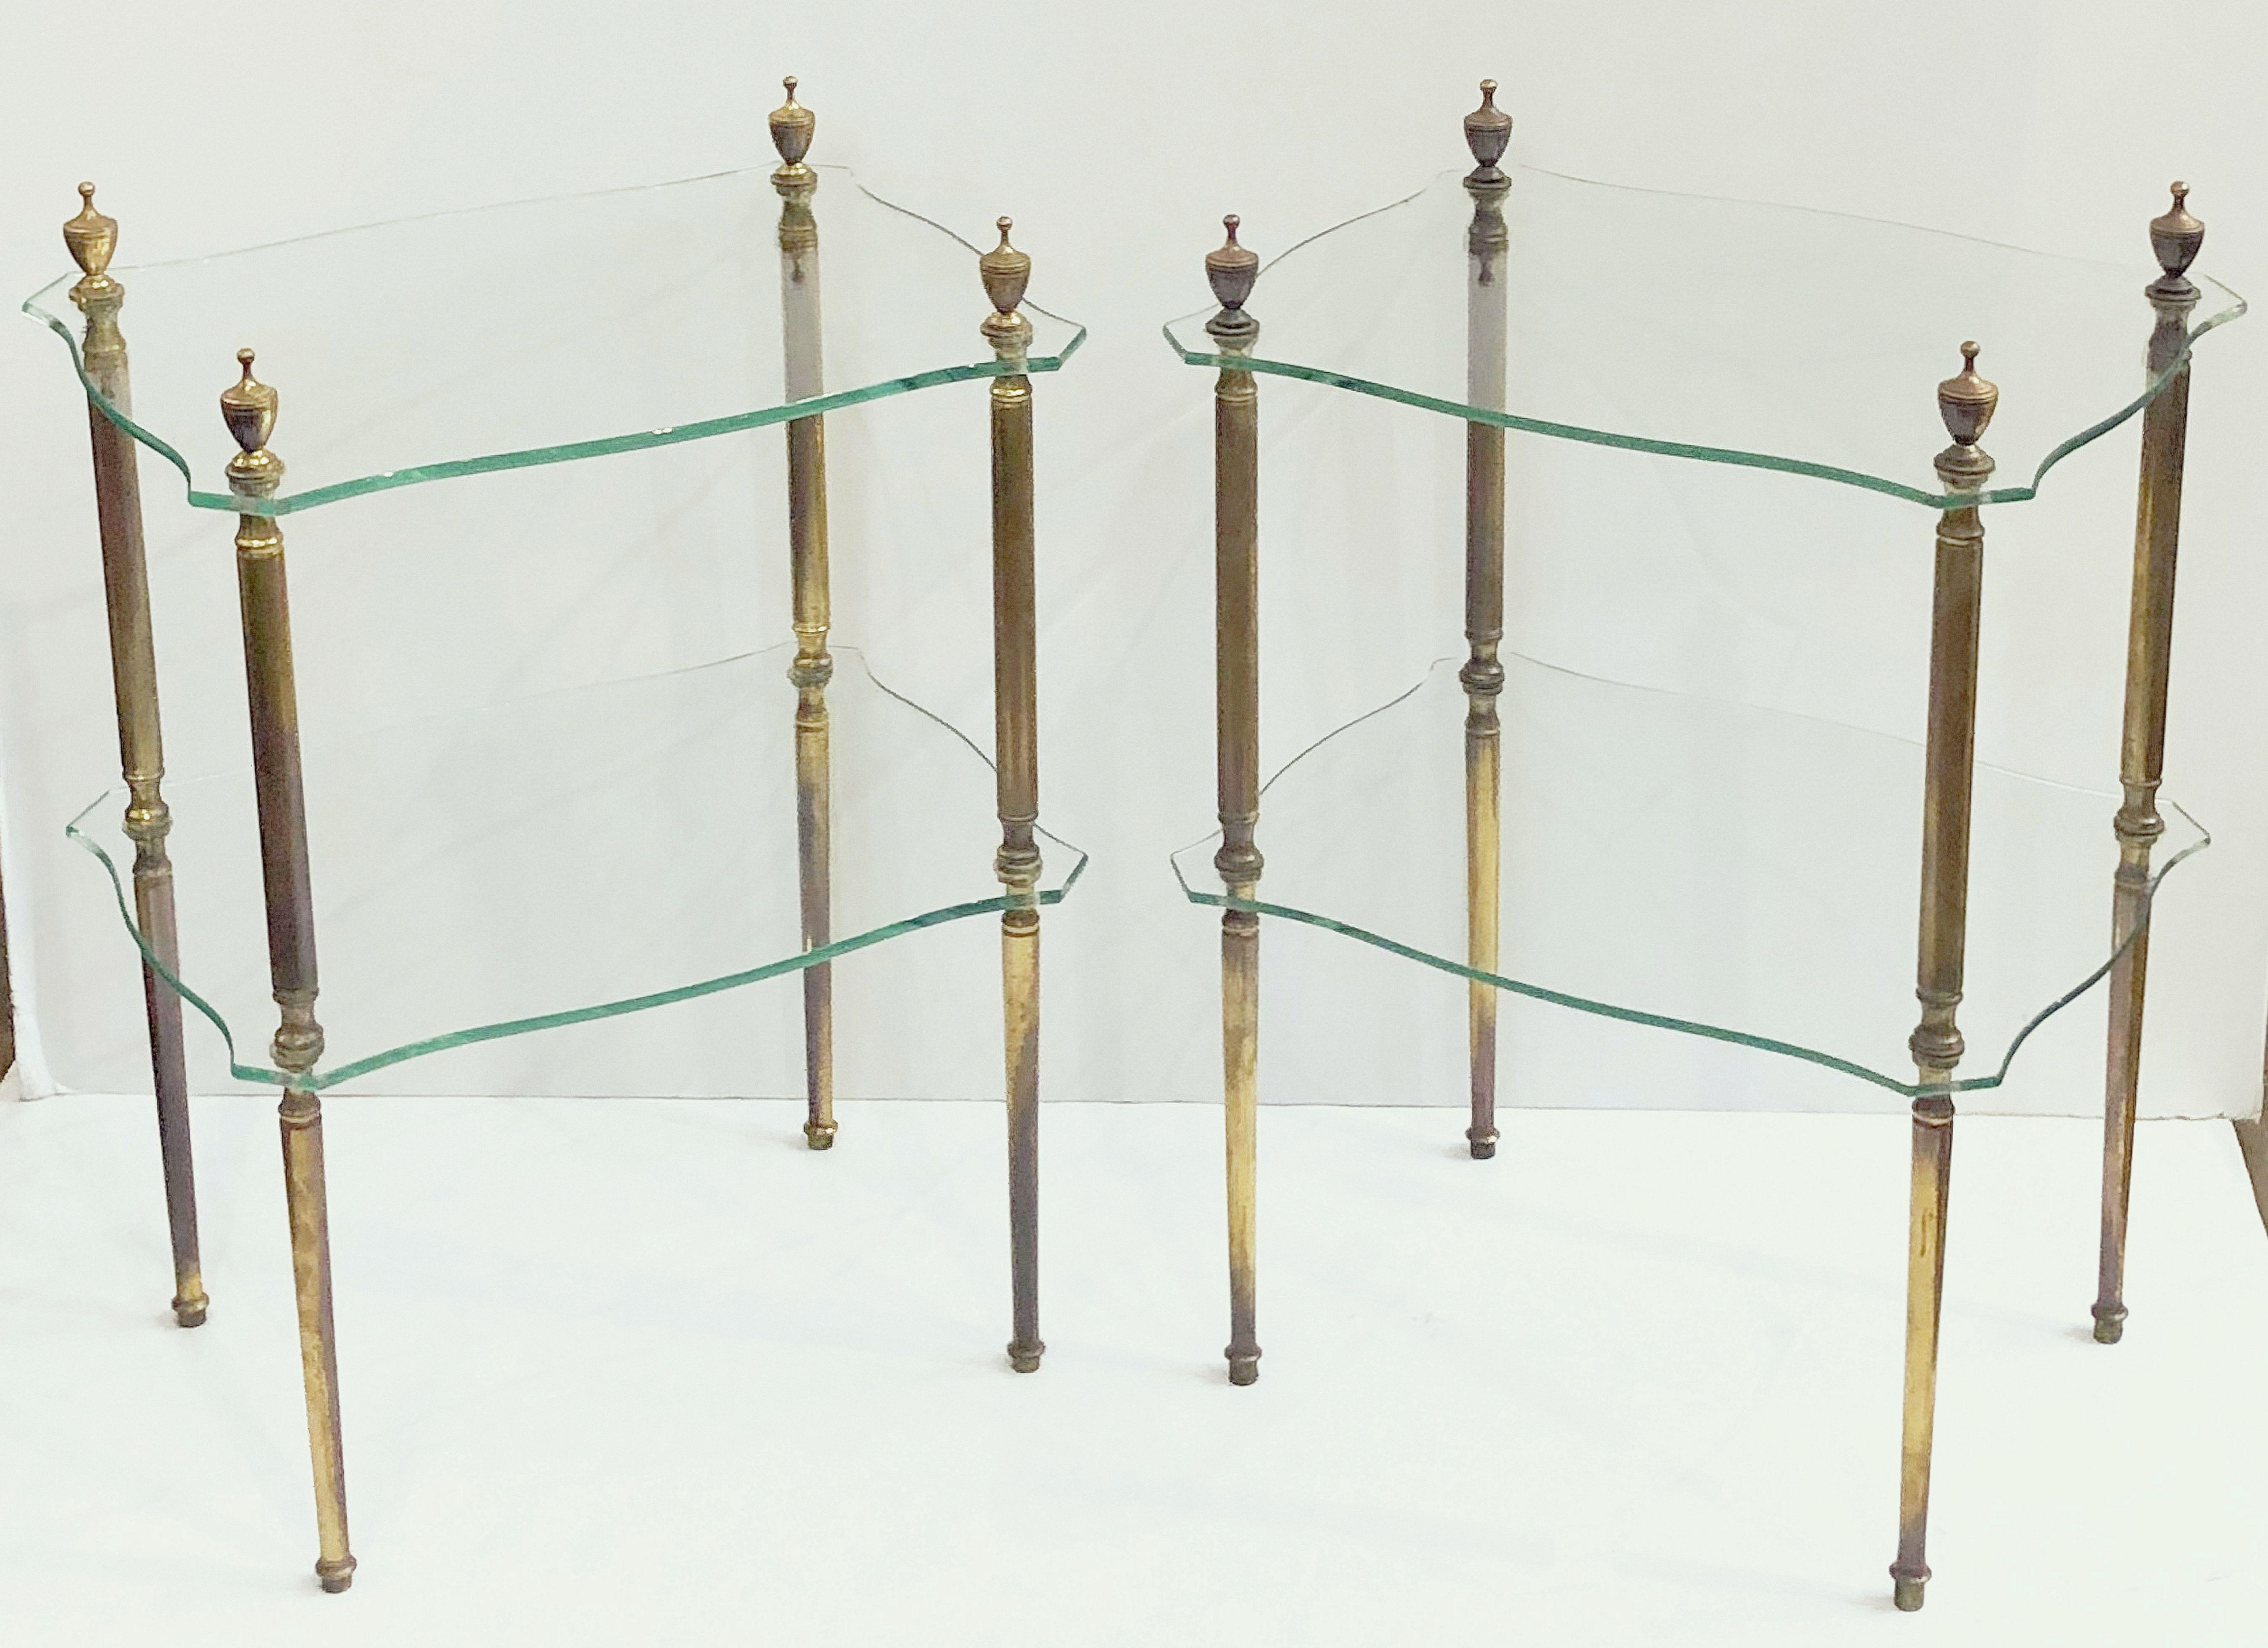 A pair of fine French two-tiered side or end tables of glass with gilt bronze legs, each table featuring two rectangular glass panels with serpentine edges, mounted to stylish supports with finial accents.

Dimensions: Height 23 1/2 inches x width